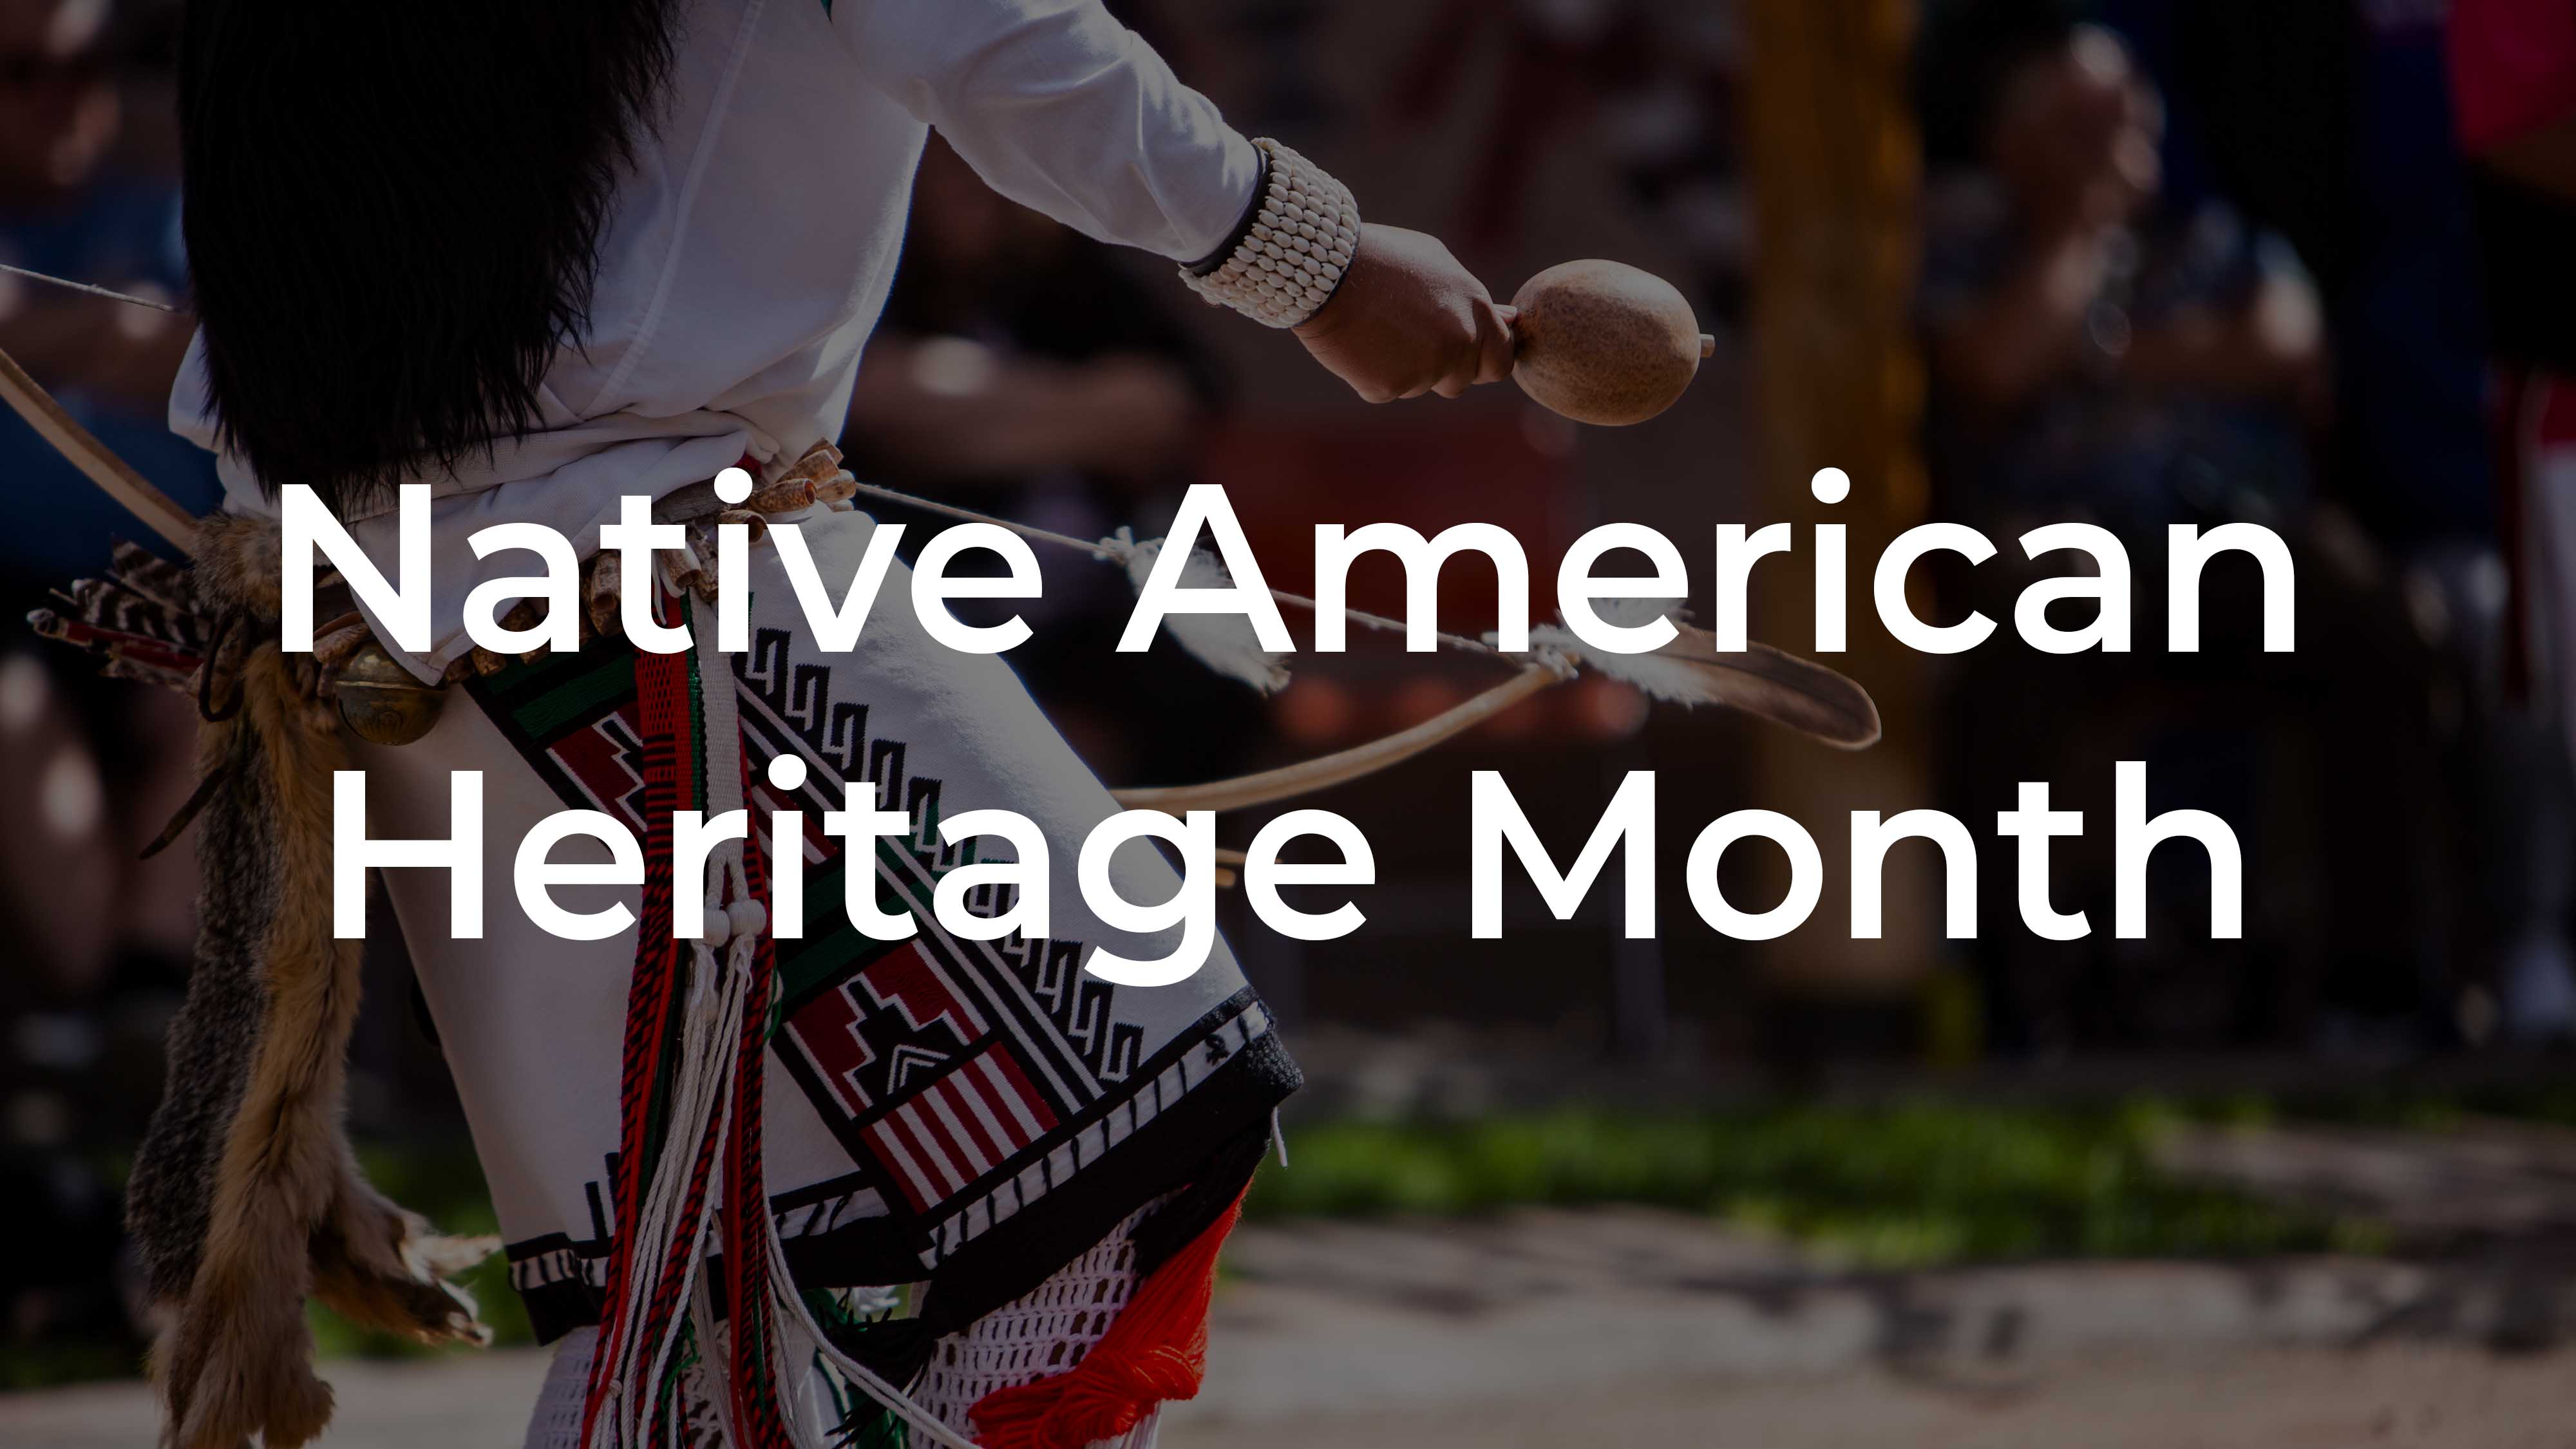 Native American Heritage Month Button